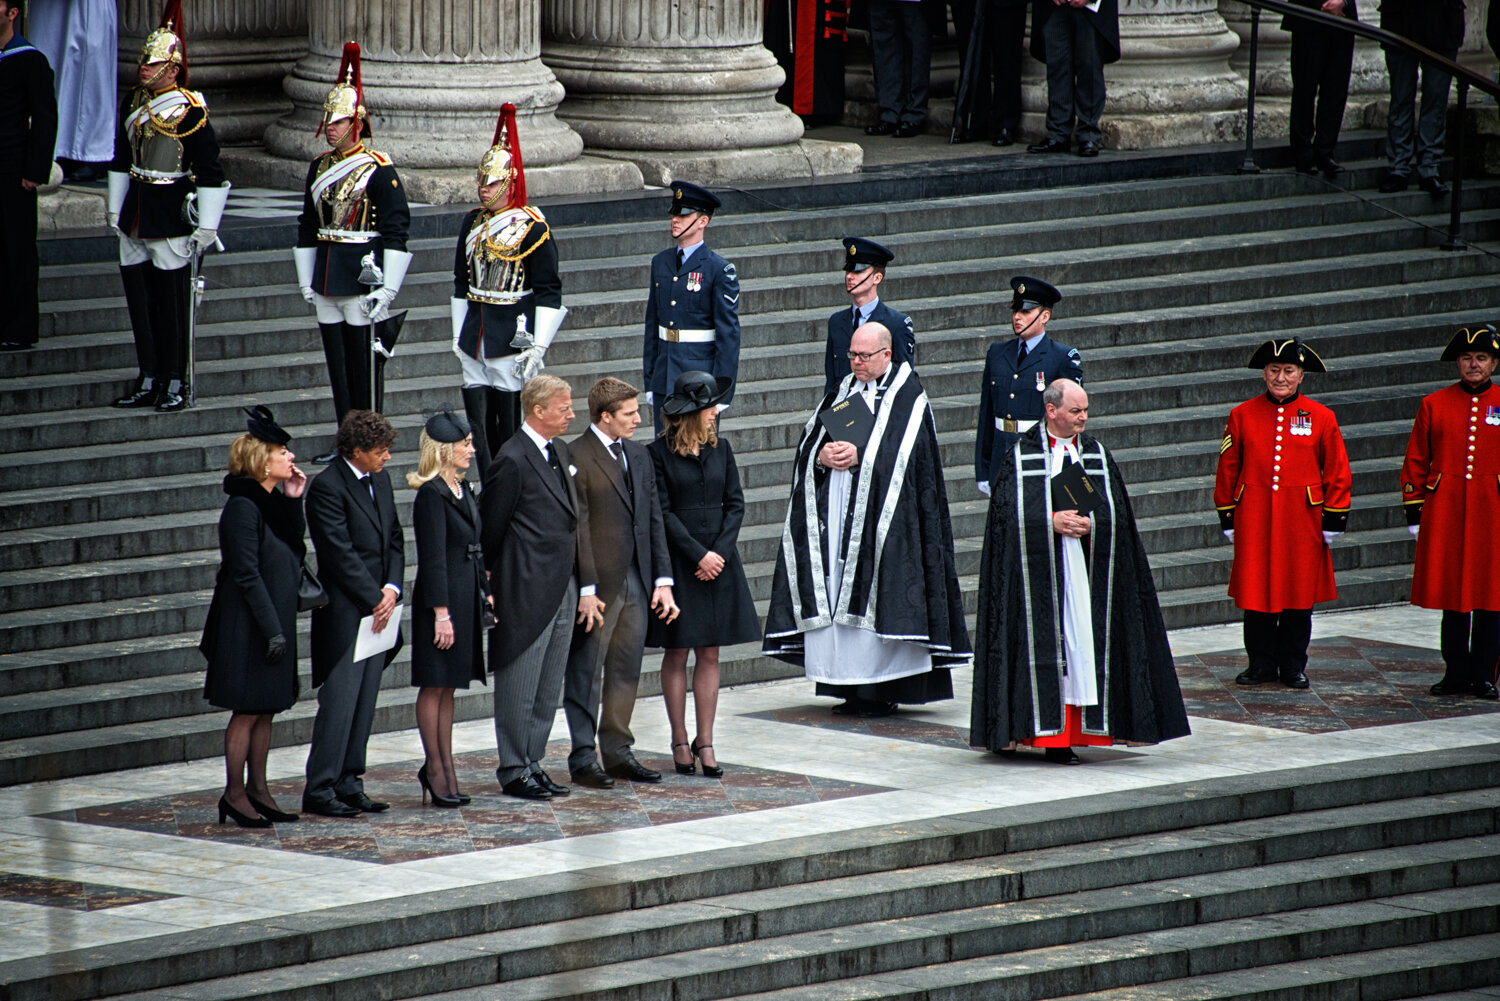  The Thatcher family, waiting to greet the Queen and Prince Phillip 